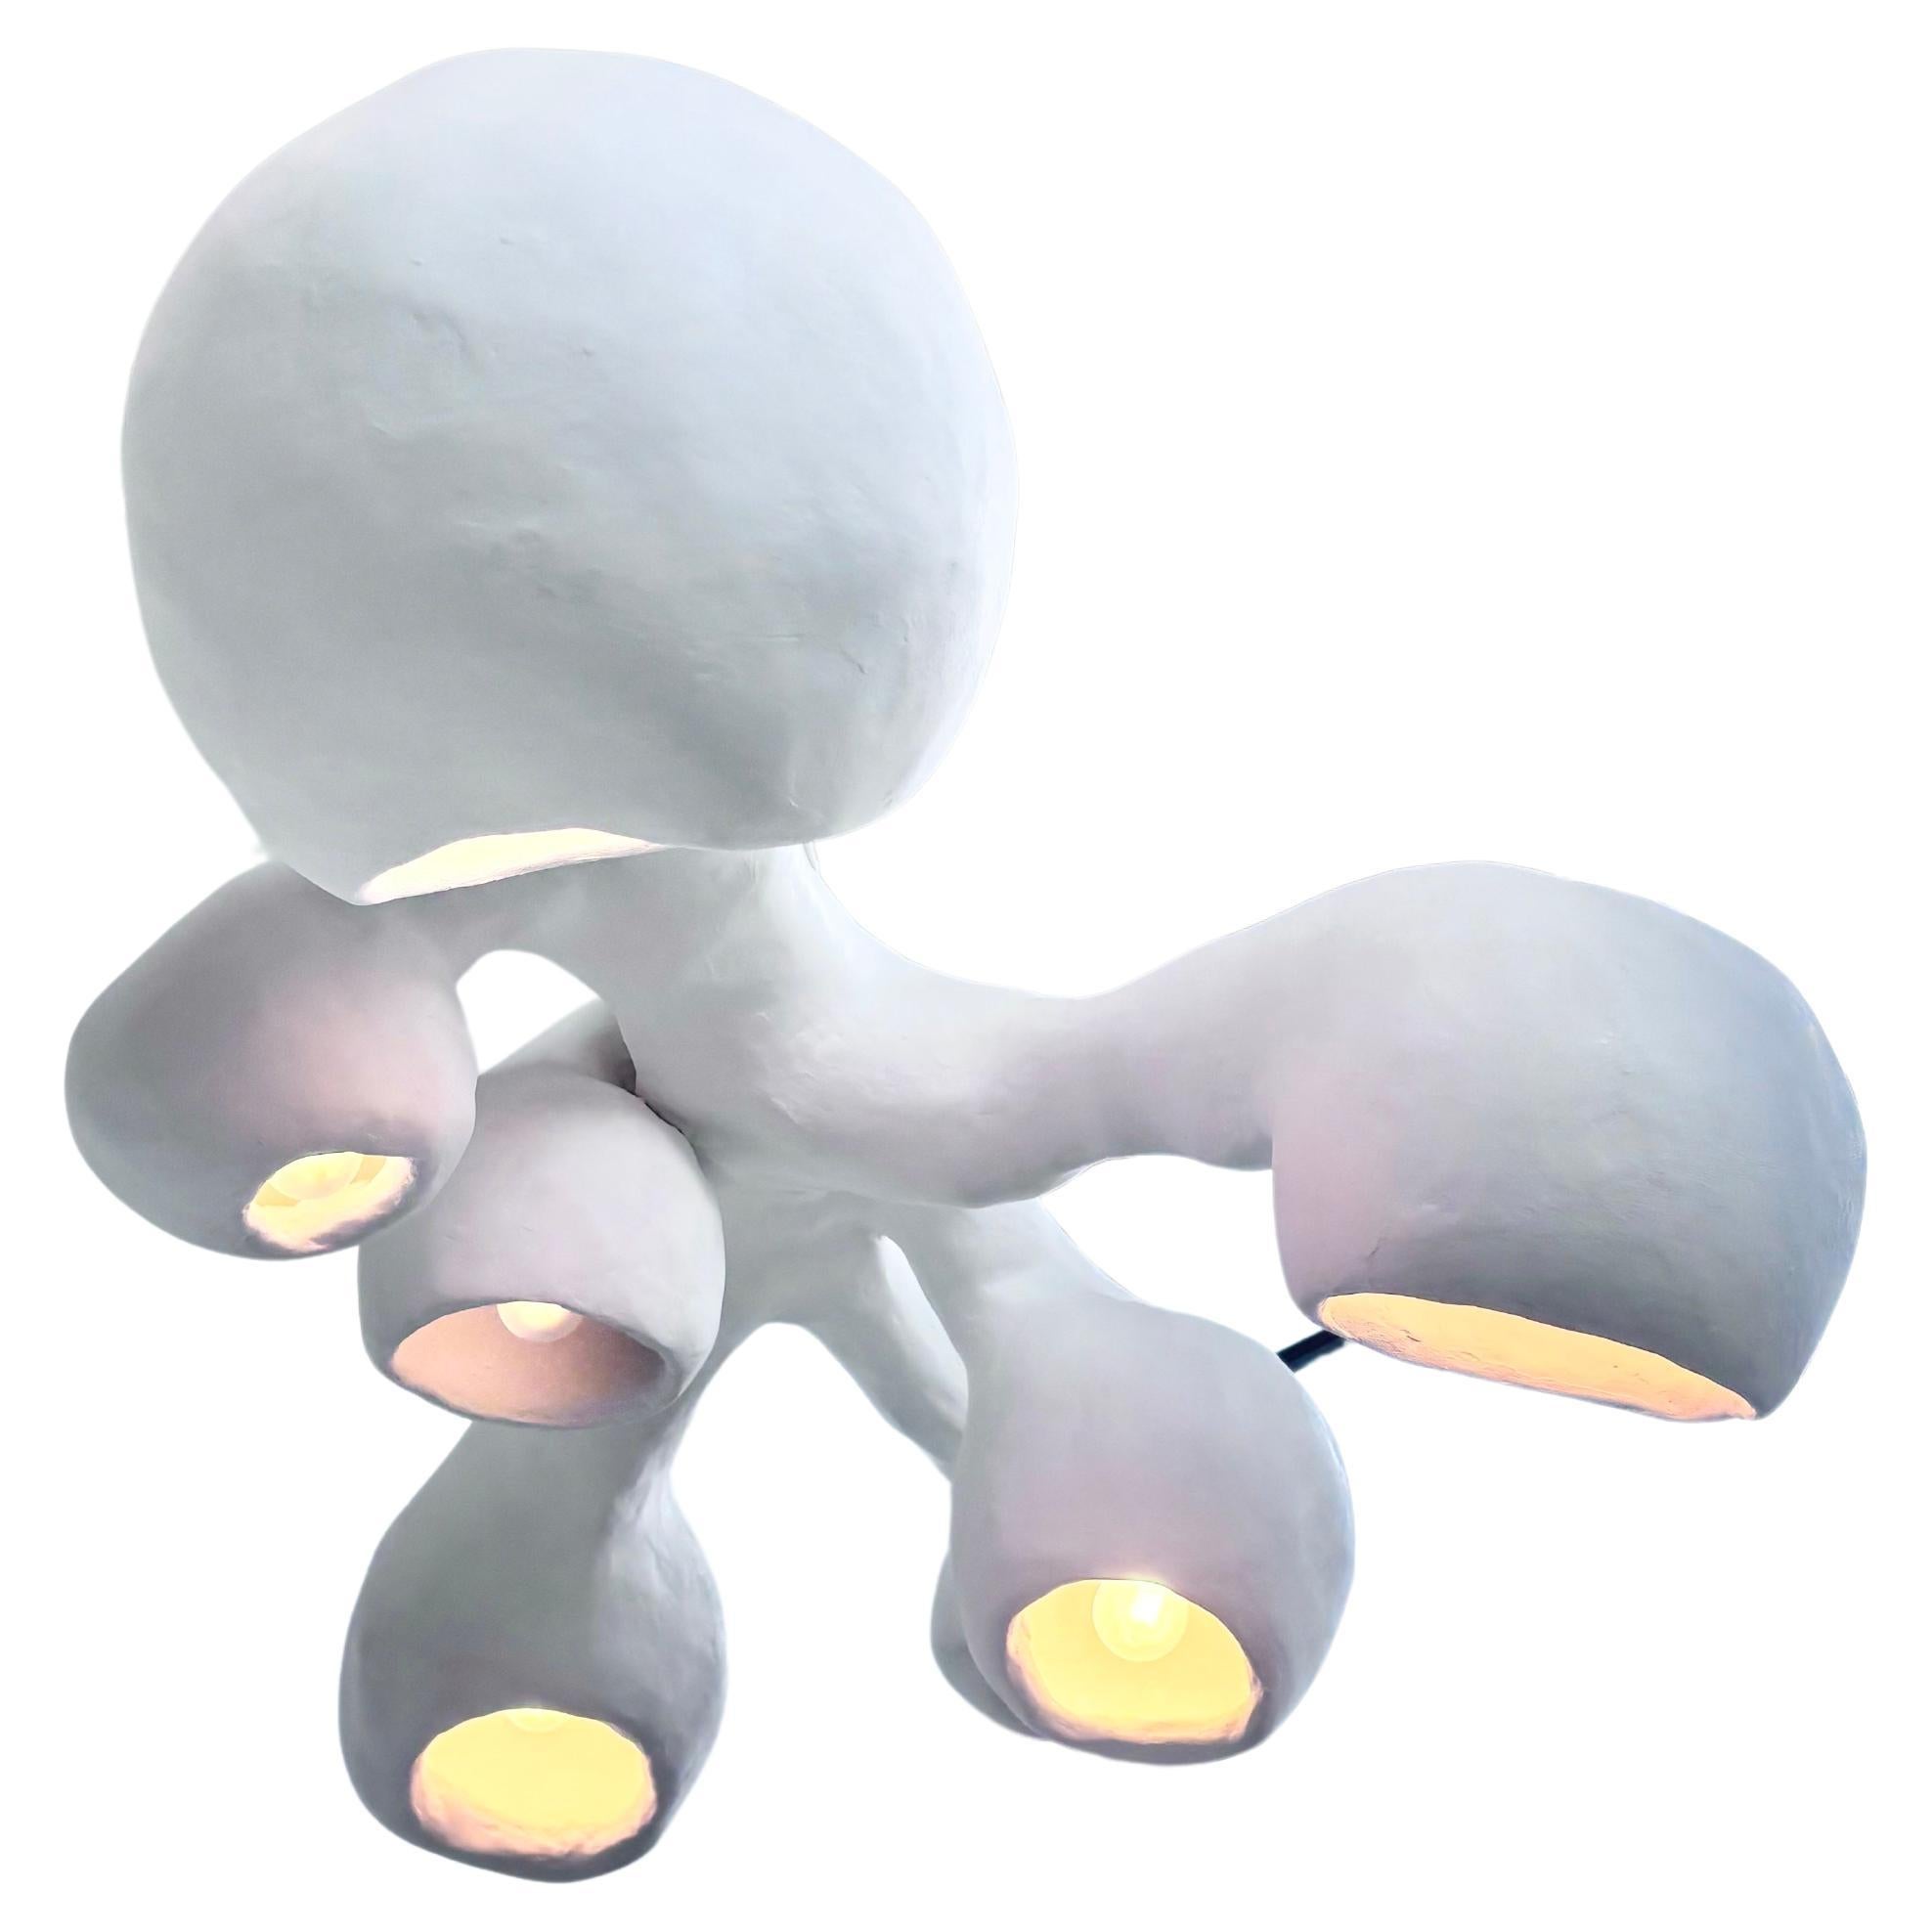 Biomorphic Line by Studio Chora, 'Invader' Light Chandelier, Plaster Stone In New Condition For Sale In Albuquerque, NM